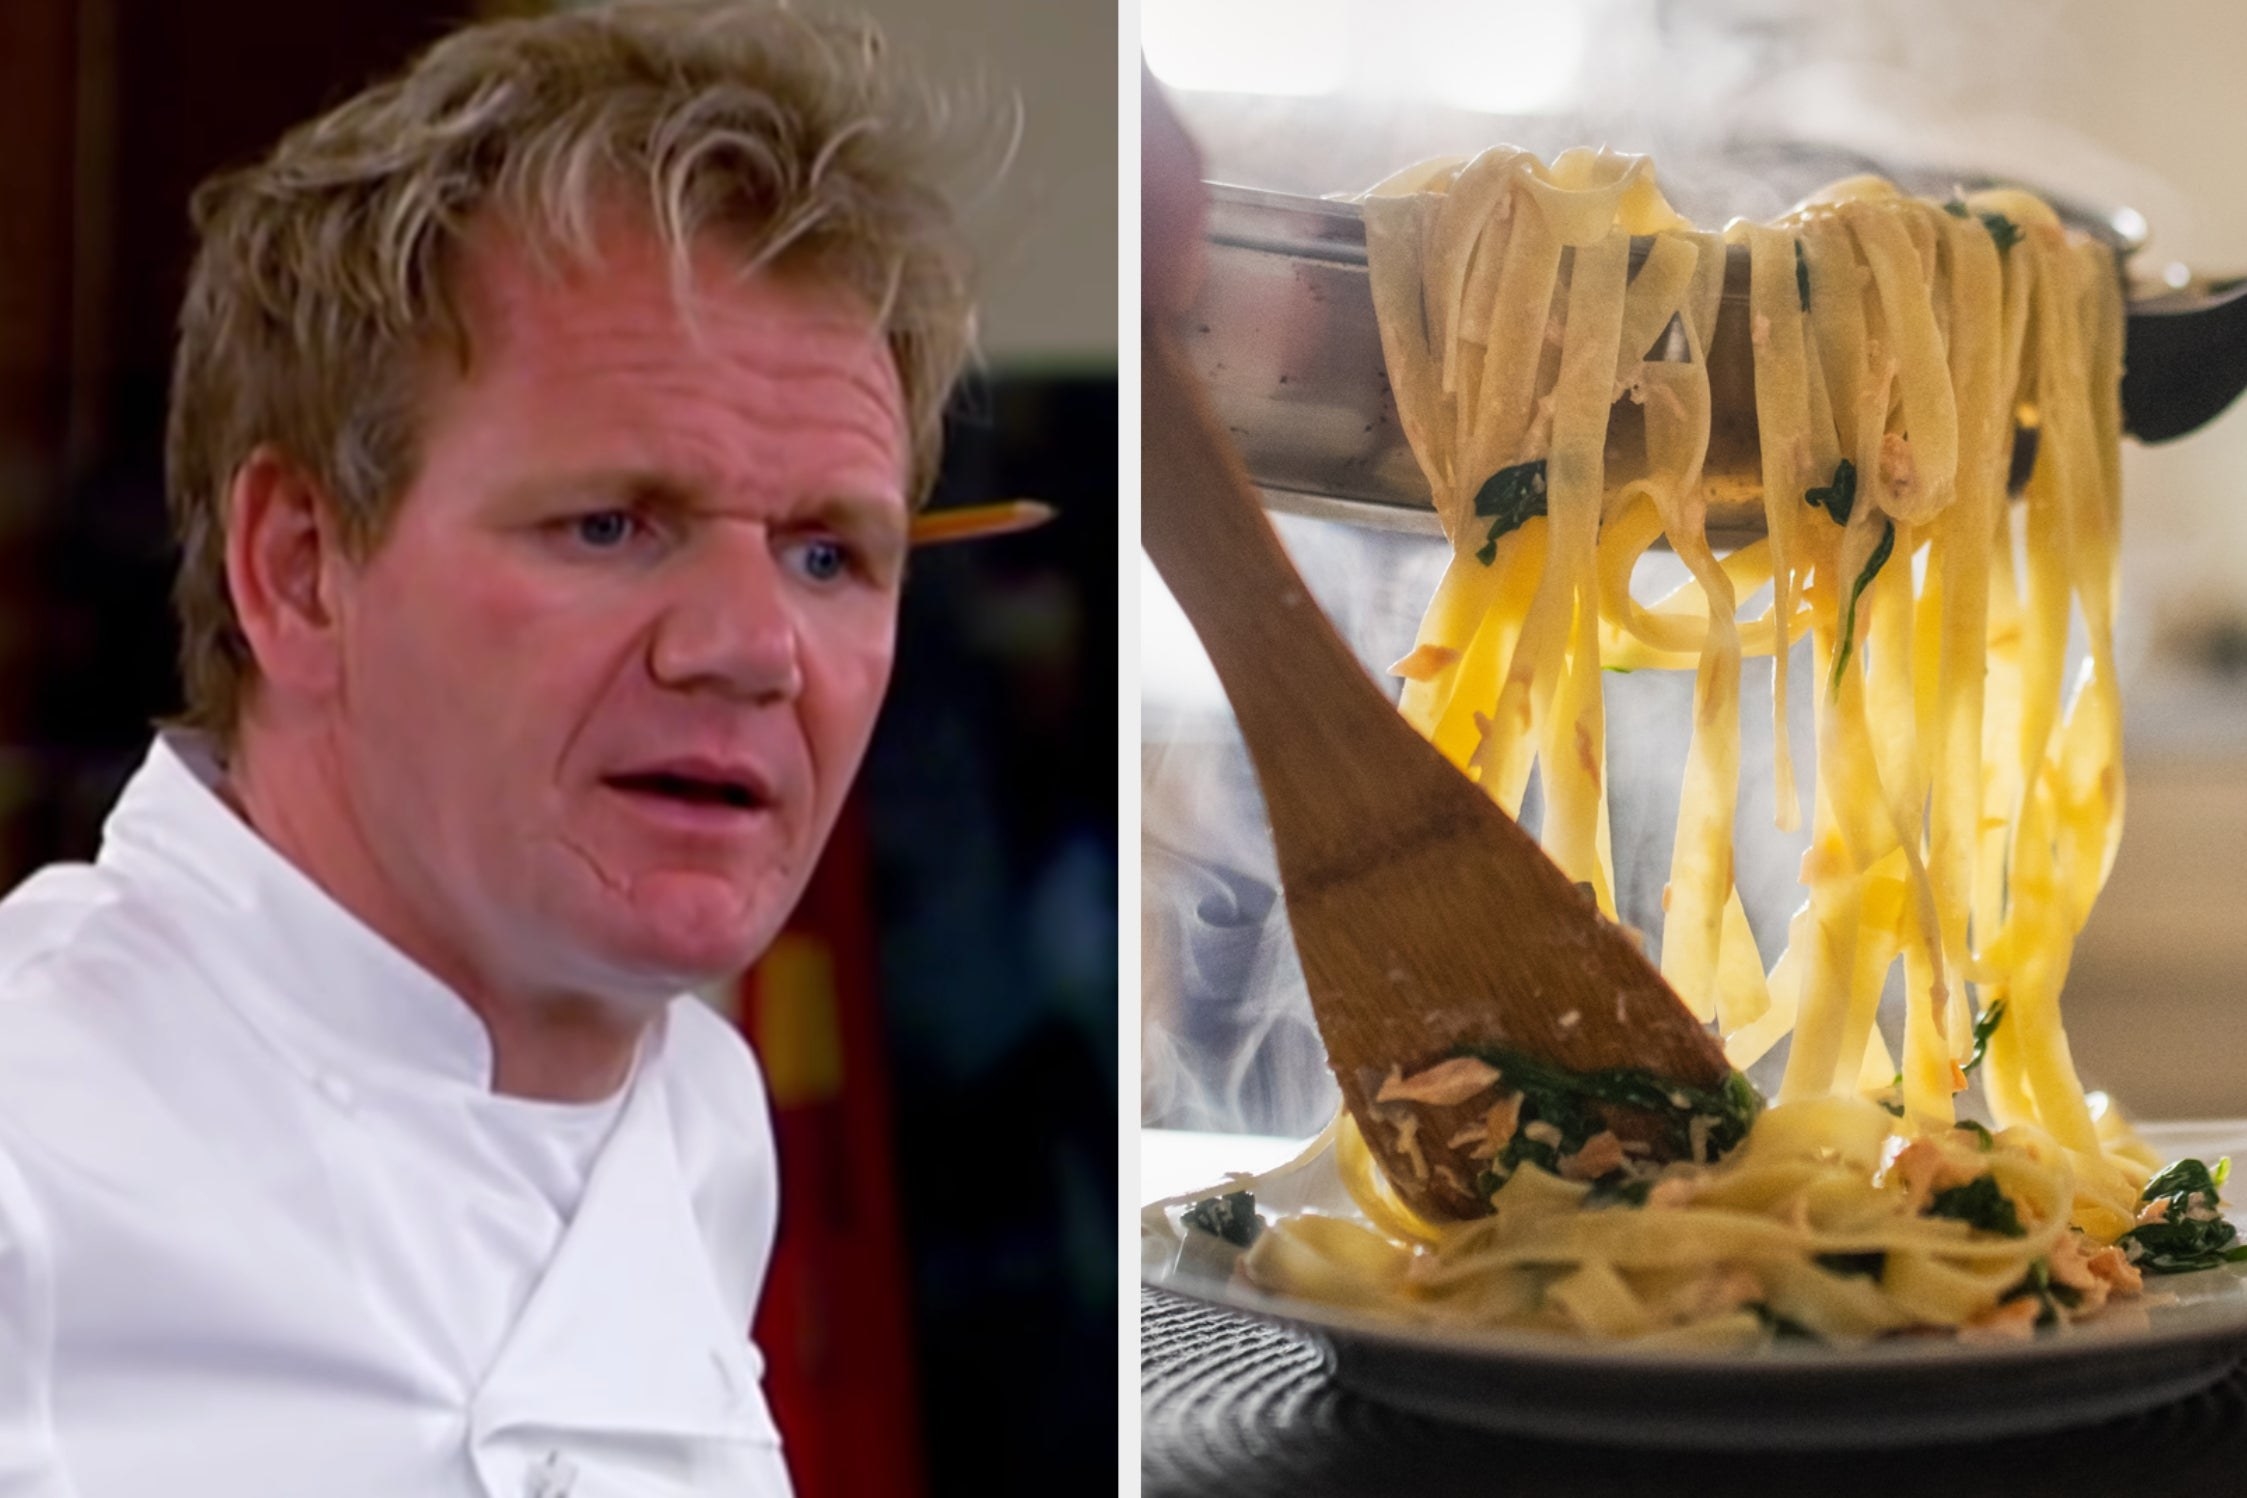 gordon ramsay on the left looking concerned and someone spooning pasta from a pan onto the plate on the right